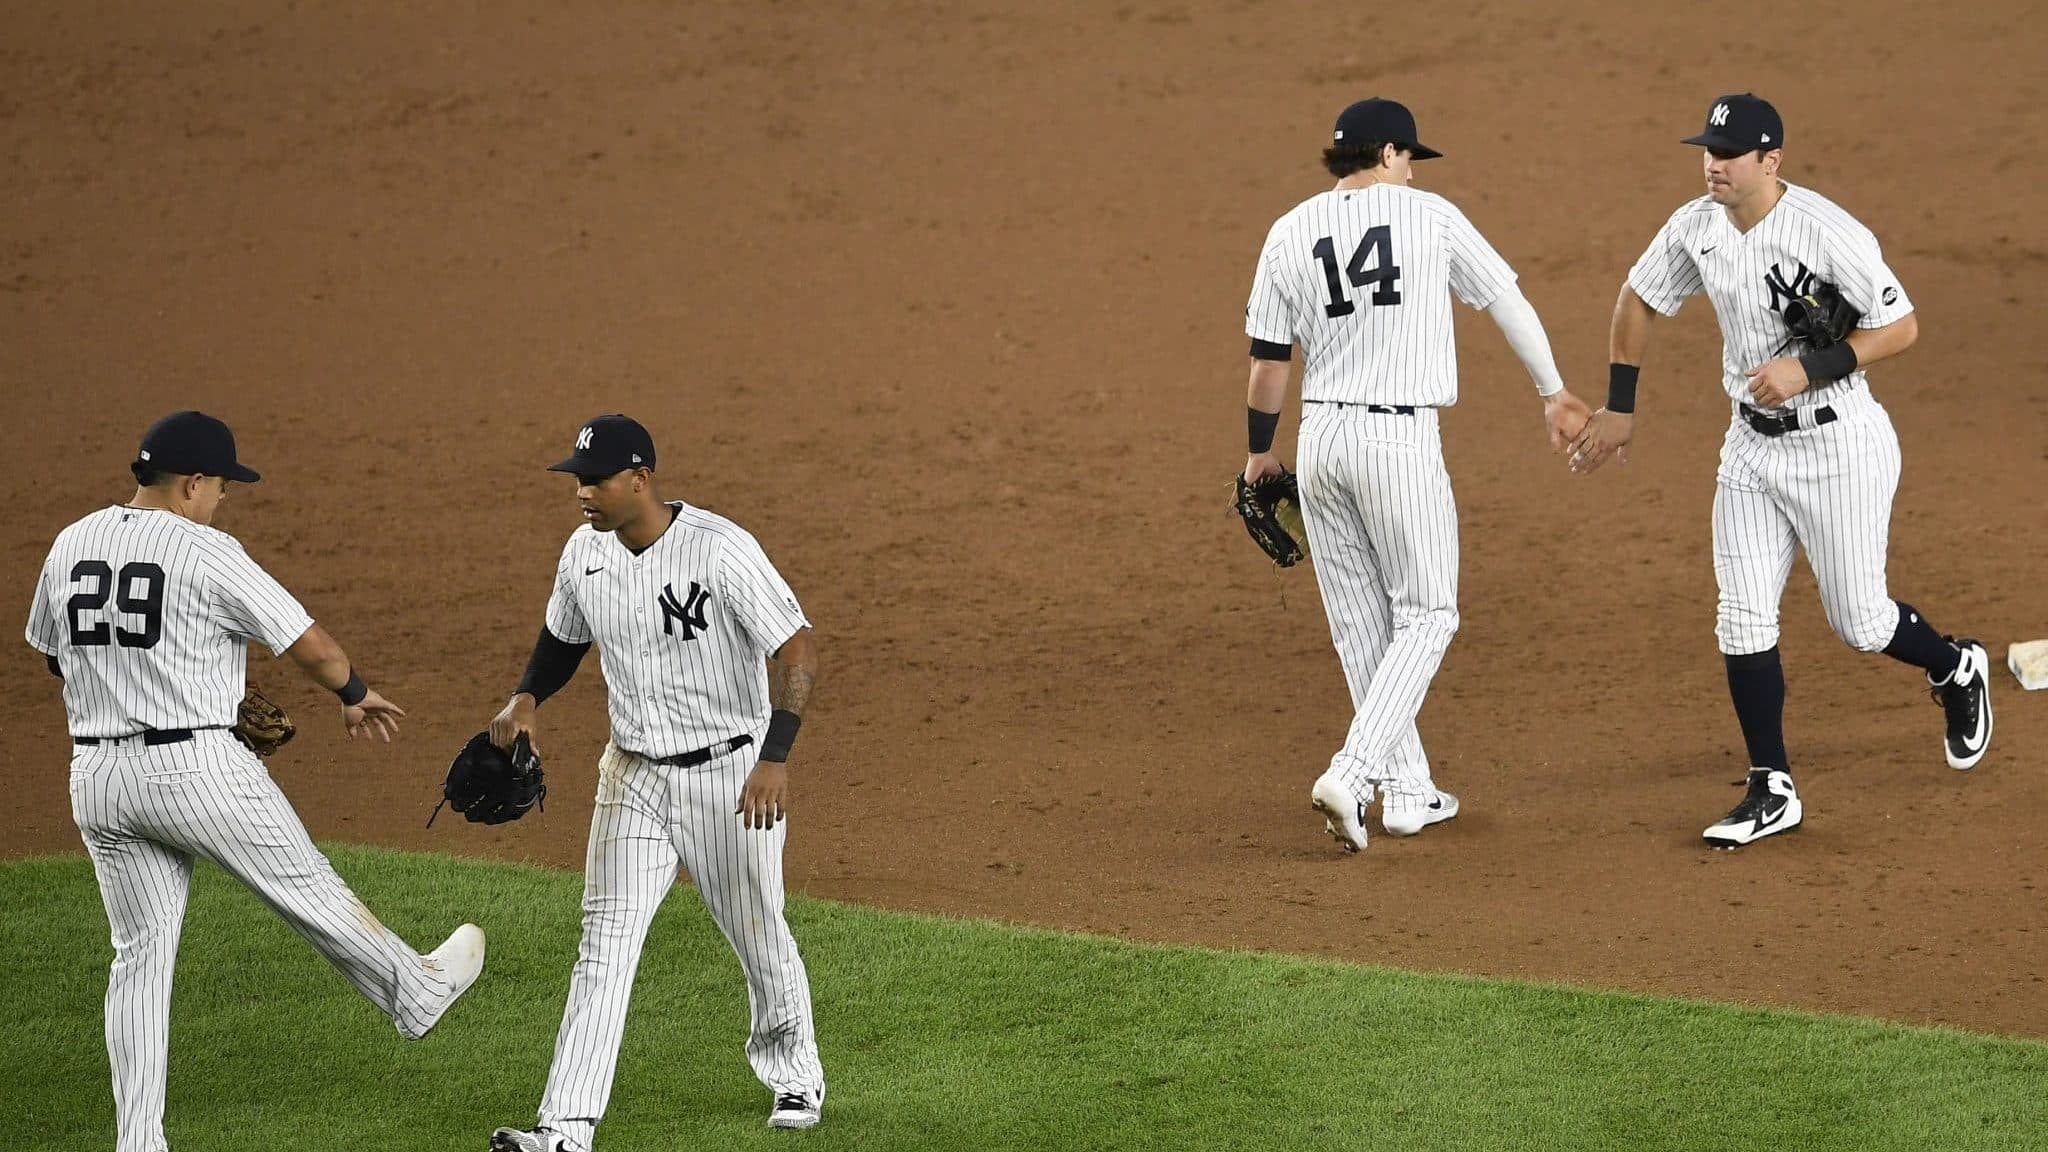 NEW YORK, NEW YORK - AUGUST 11: Gio Urshela #29, Aaron Hicks #31, Tyler Wade #14, and Mike Tauchman #39 of the New York Yankees celebrate after the ninth inning against the Atlanta Braves at Yankee Stadium on August 11, 2020 in the Bronx borough of New York City. The Yankees won 9-6.